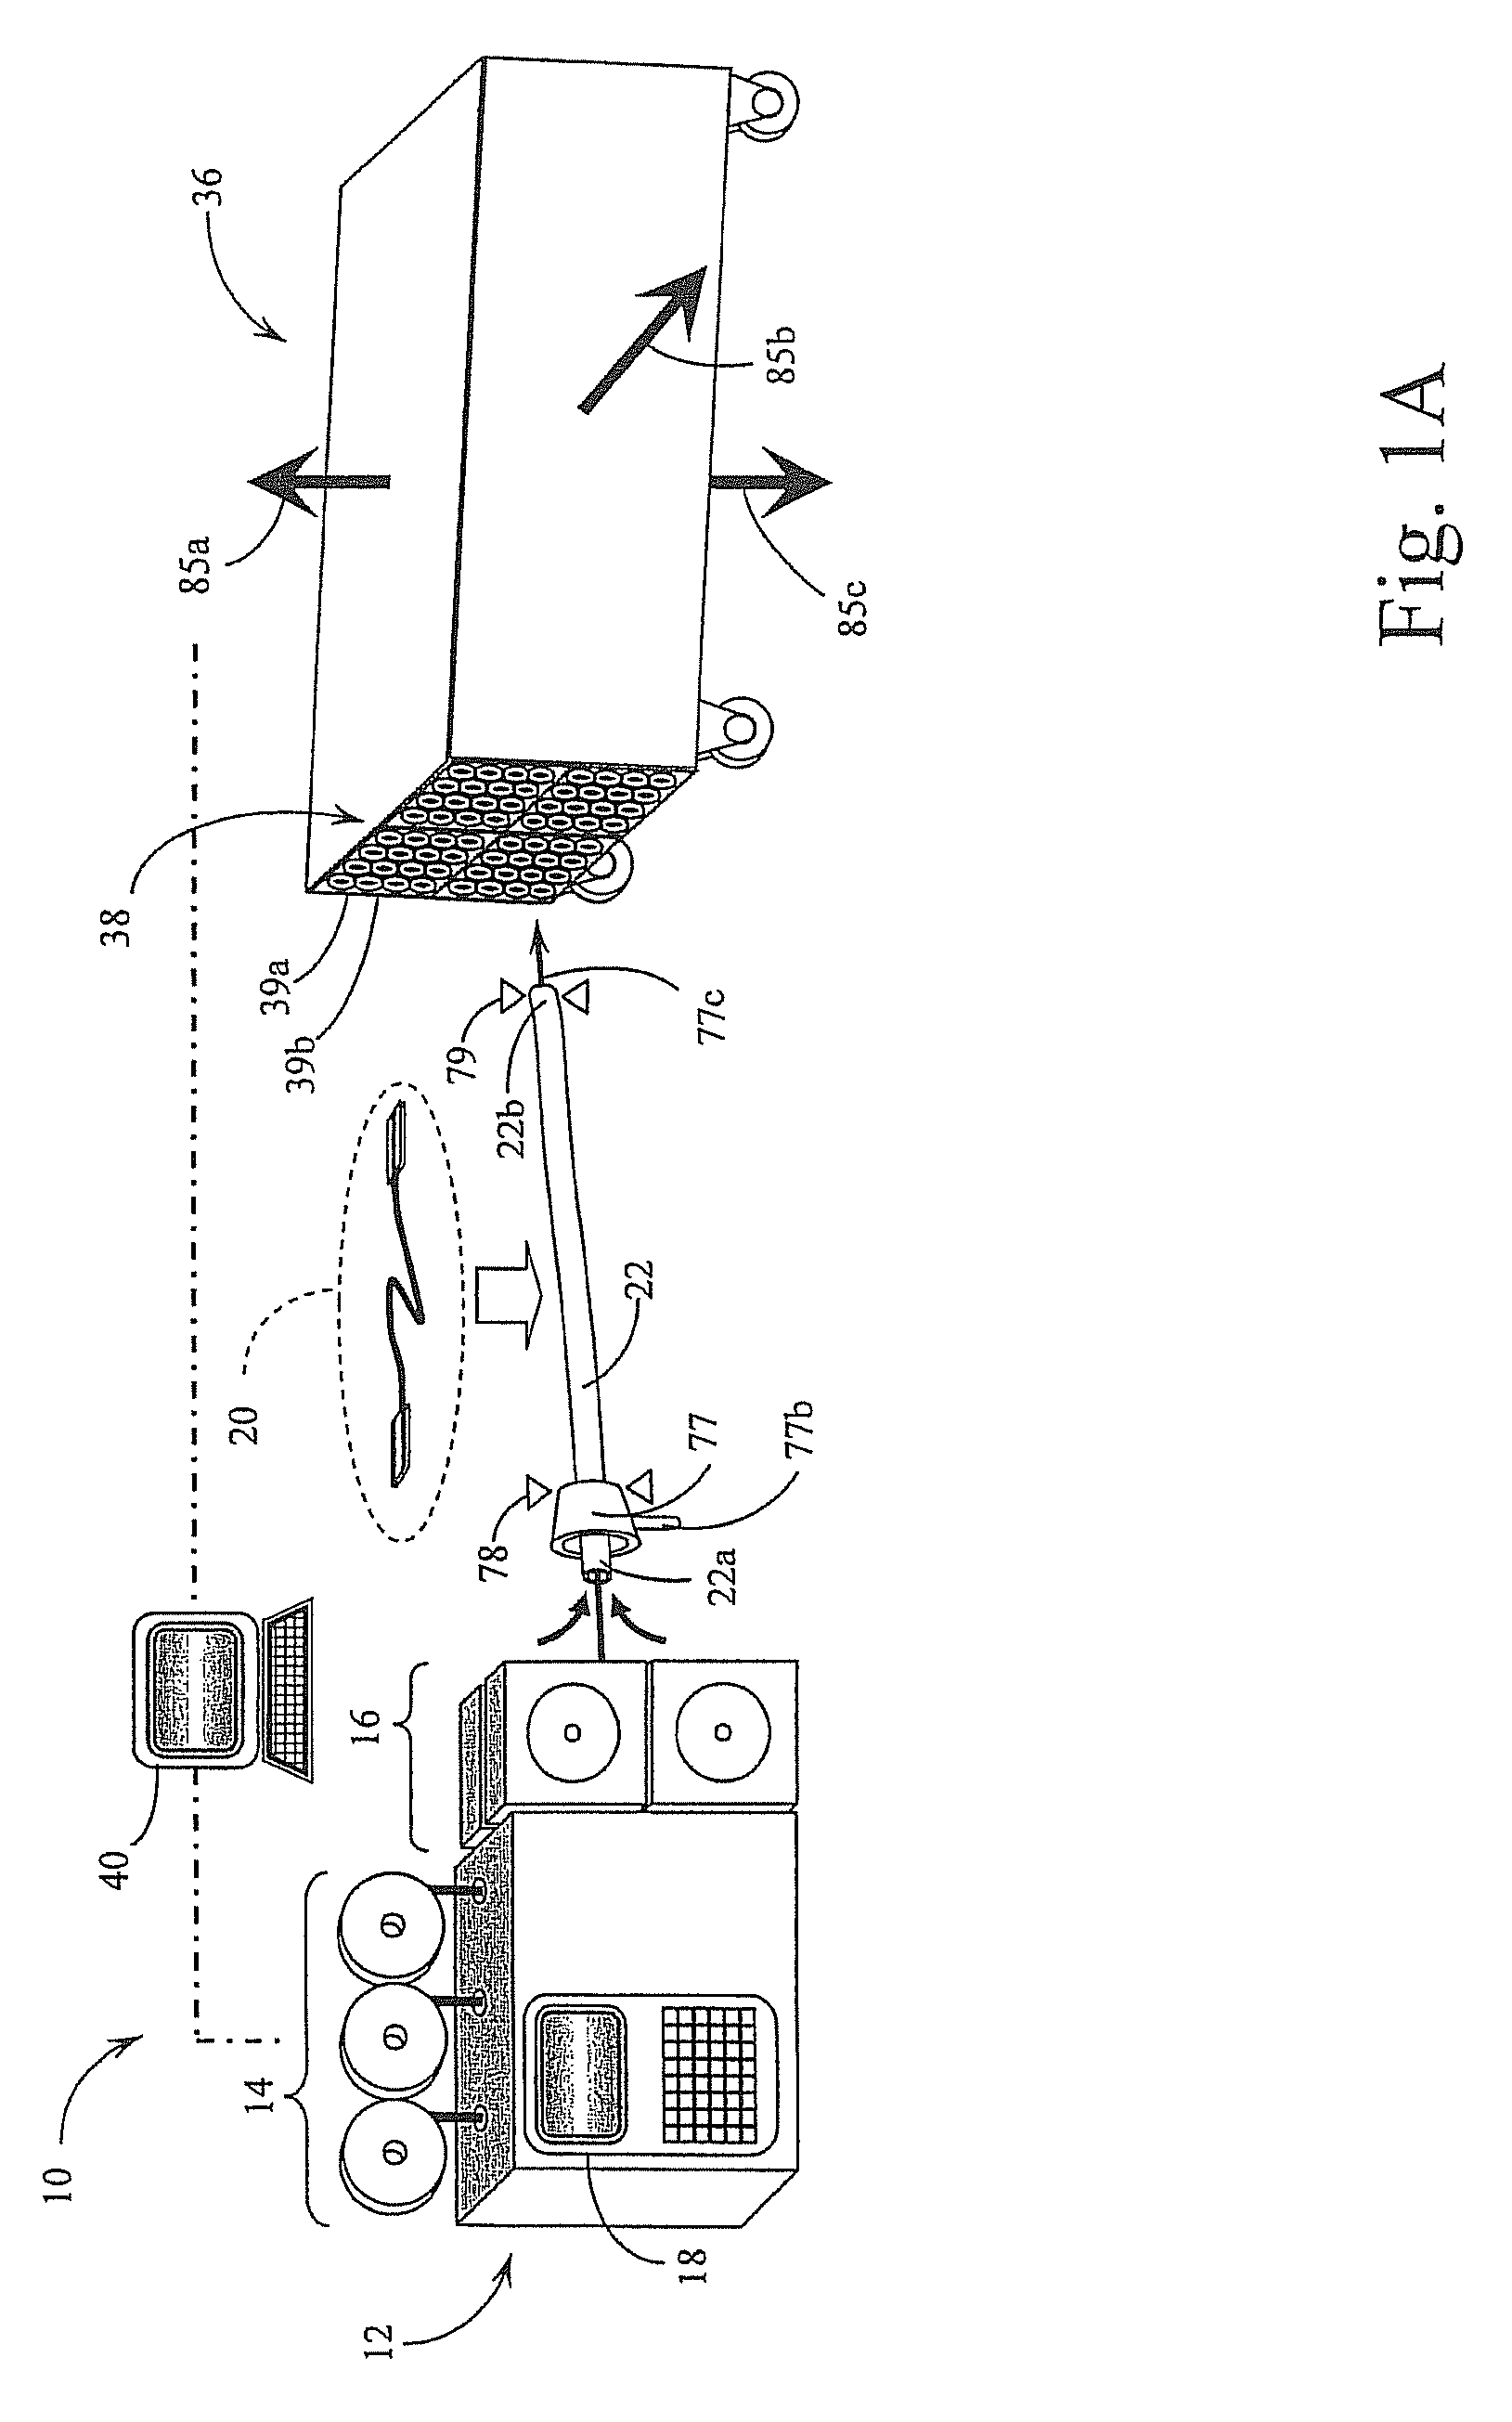 Integrated wire harness batch production with double buffer assembly systems and methods